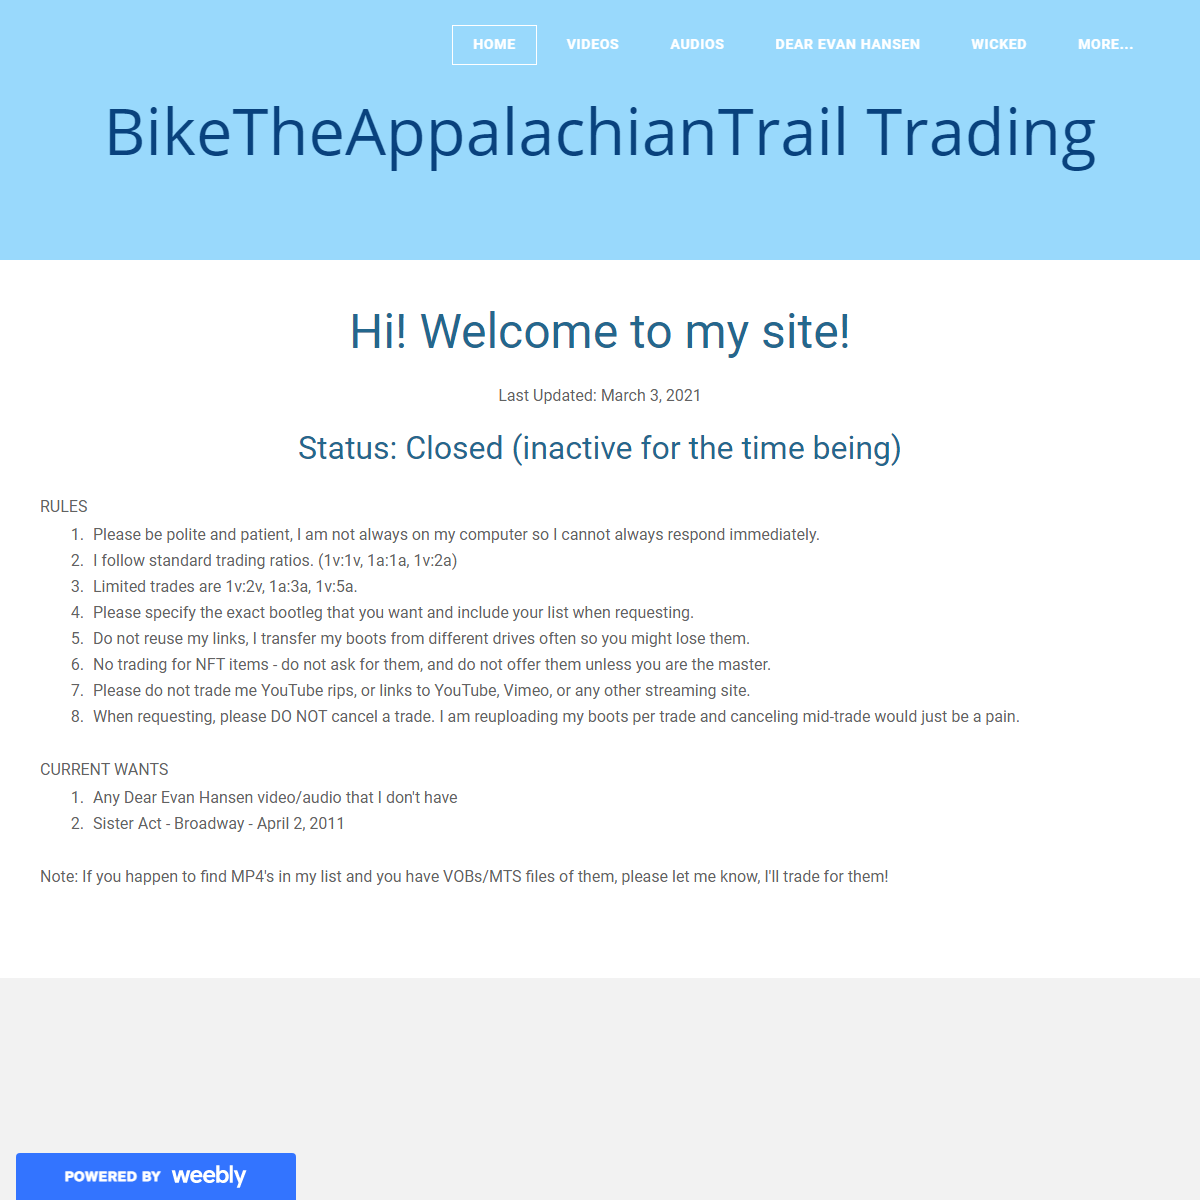 A complete backup of https://biketheappalachiantrail.weebly.com/